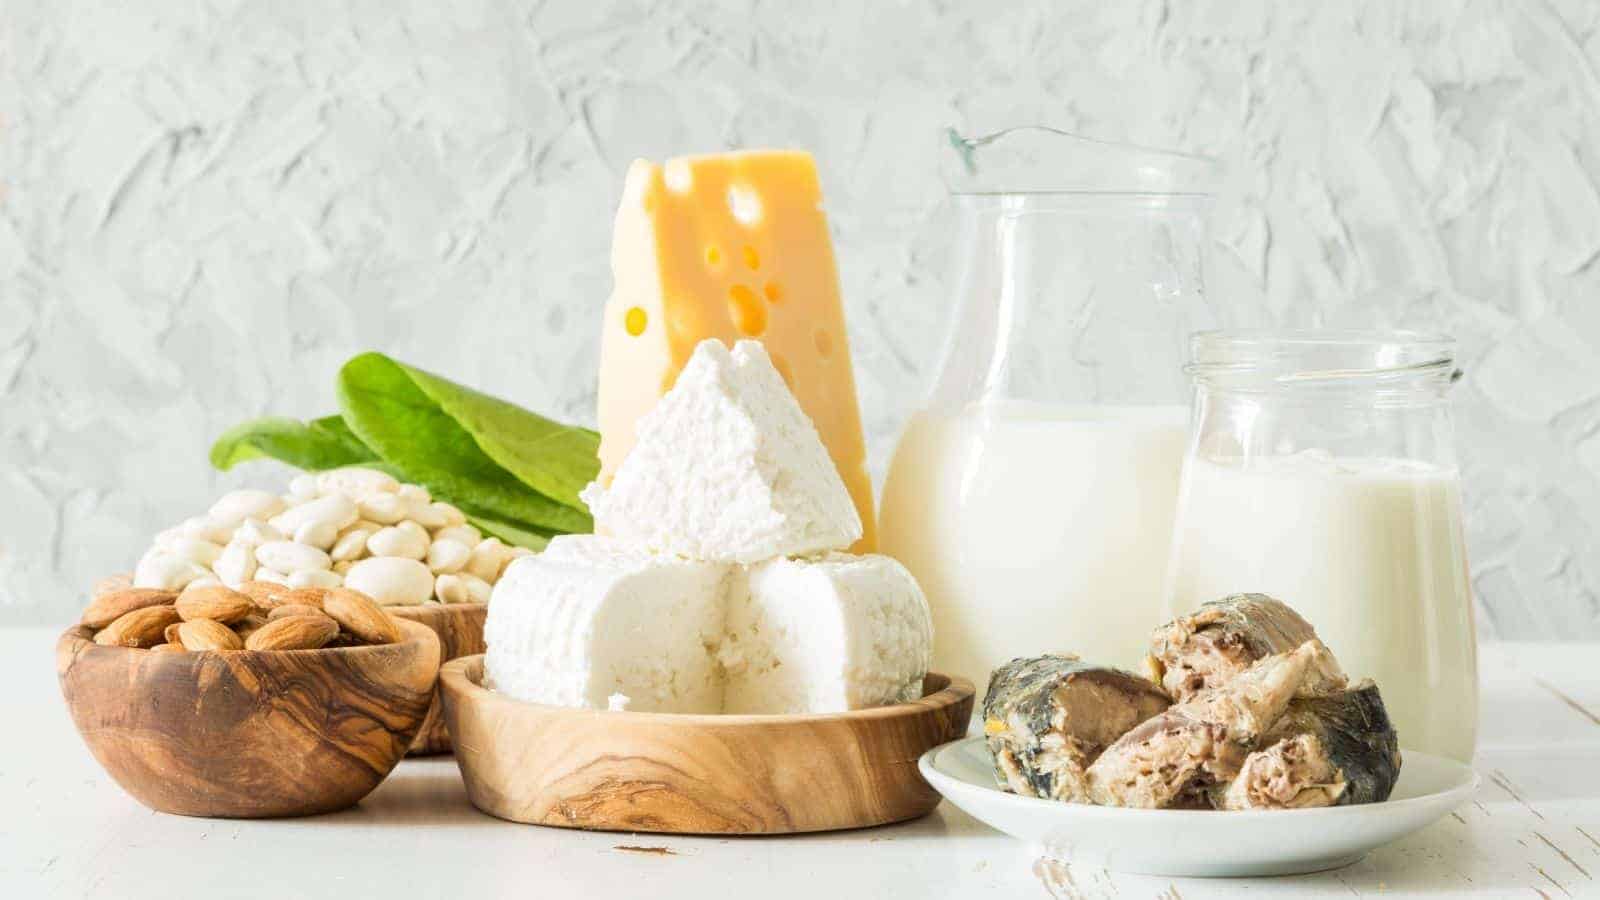 Nutritionists Reveal 15 Calcium-Rich Foods to Support Bone Health